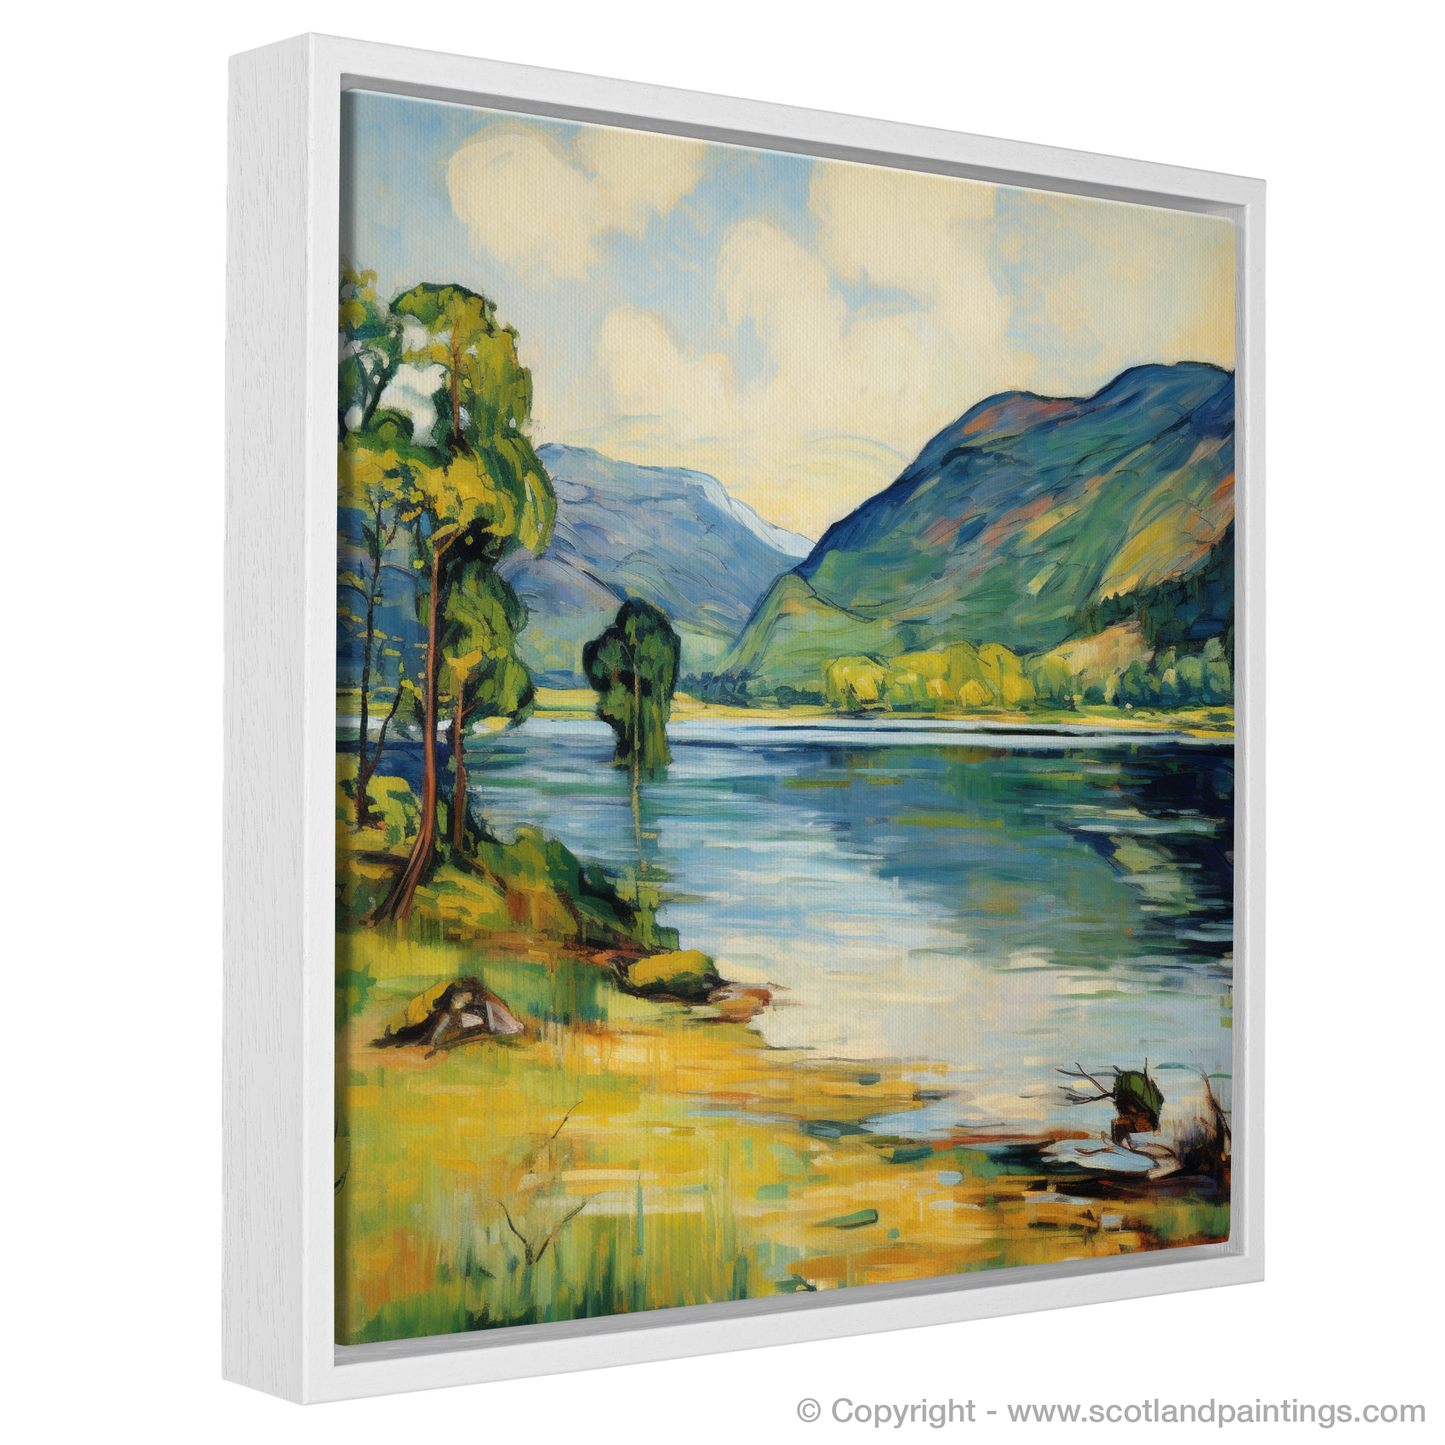 Painting and Art Print of Loch Voil in summer entitled "Summer Radiance of Loch Voil".